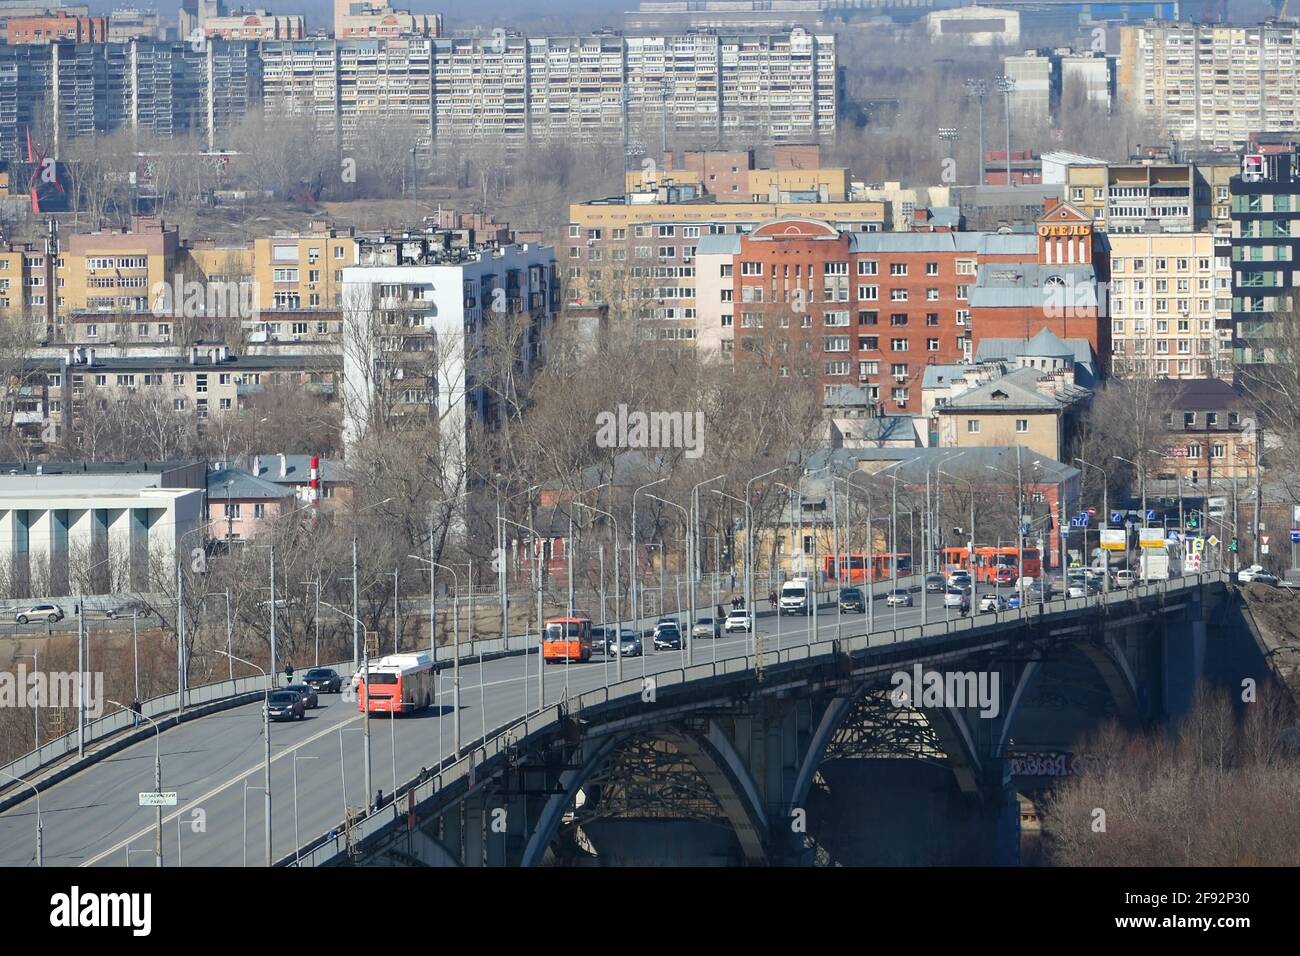 Panoramic view of the transport bridge over the river in the big city. Stock Photo